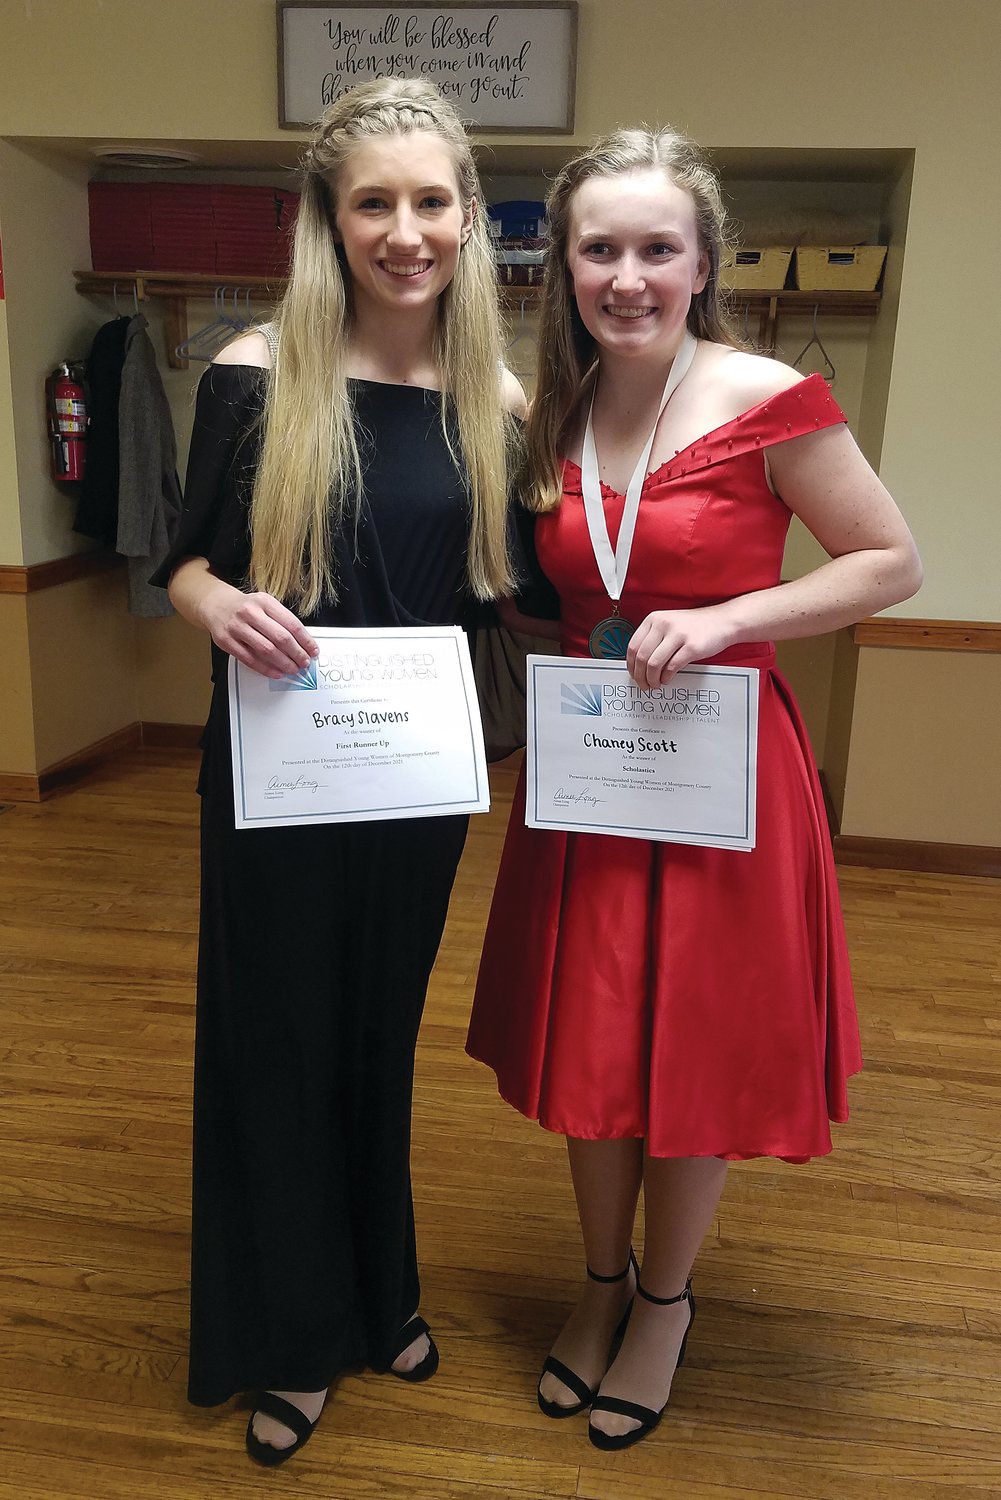 Chaney Scott, right, was selected as the winner of the Distinguished Young Woman of Montgomery County scholarship program. First runner-up was Bracy Slavens, left.